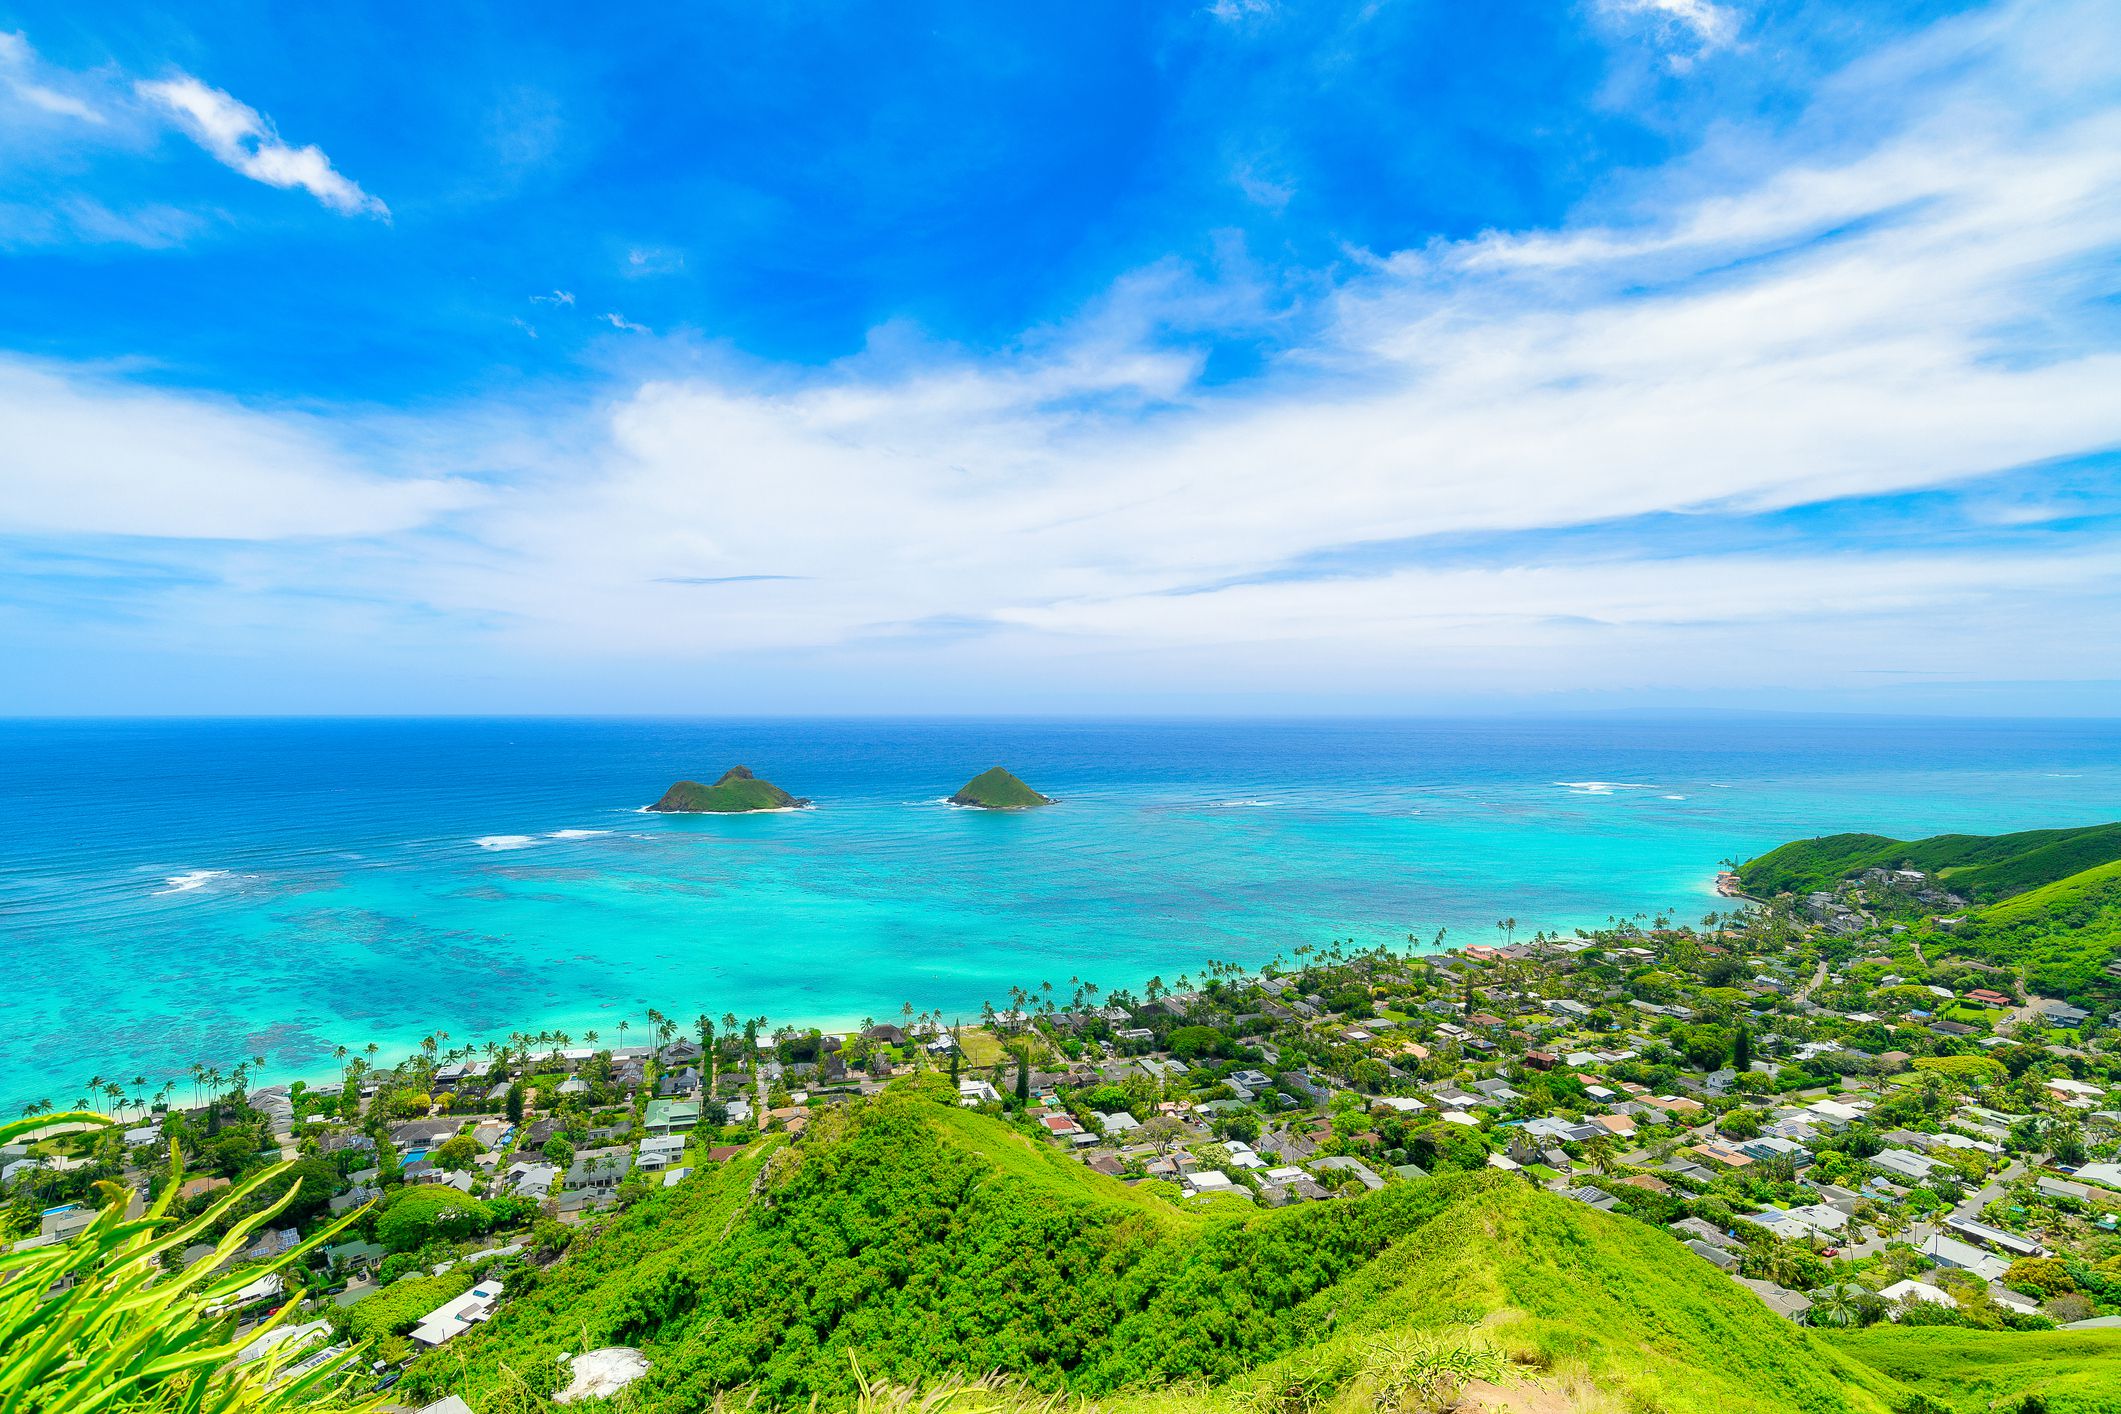 <p>Residents of Kailua on the eastern shores of Oahu can enjoy nearby Lanikai Beach for snorkeling with sea turtles, or Kailua Beach with spectacular vistas. Though relatively small, the city offers residents a diverse array of shops and restaurants. Home cooks may enjoy the local farmers market.</p><ul><li>Population: 19,713</li><li>Median Household Income: $79,331</li><li>Cost of Living: 130% of U.S. average</li><li>Median Rent Price: $3,978</li><li>Home Price-to-Income Ratio: 16</li><li>Average Property Tax: 0.32%</li></ul><p class="padding-top-ms u-margin-bottom-ms"><b>Housing Affordability: </b>Average rents in Kailua are high at $3,978 per month, which is high compared to other Hawaiian cities. As noted above, homes are expensive here, but apartments do come on the market for less than $700,000, so good things may come to those who can wait.</p>